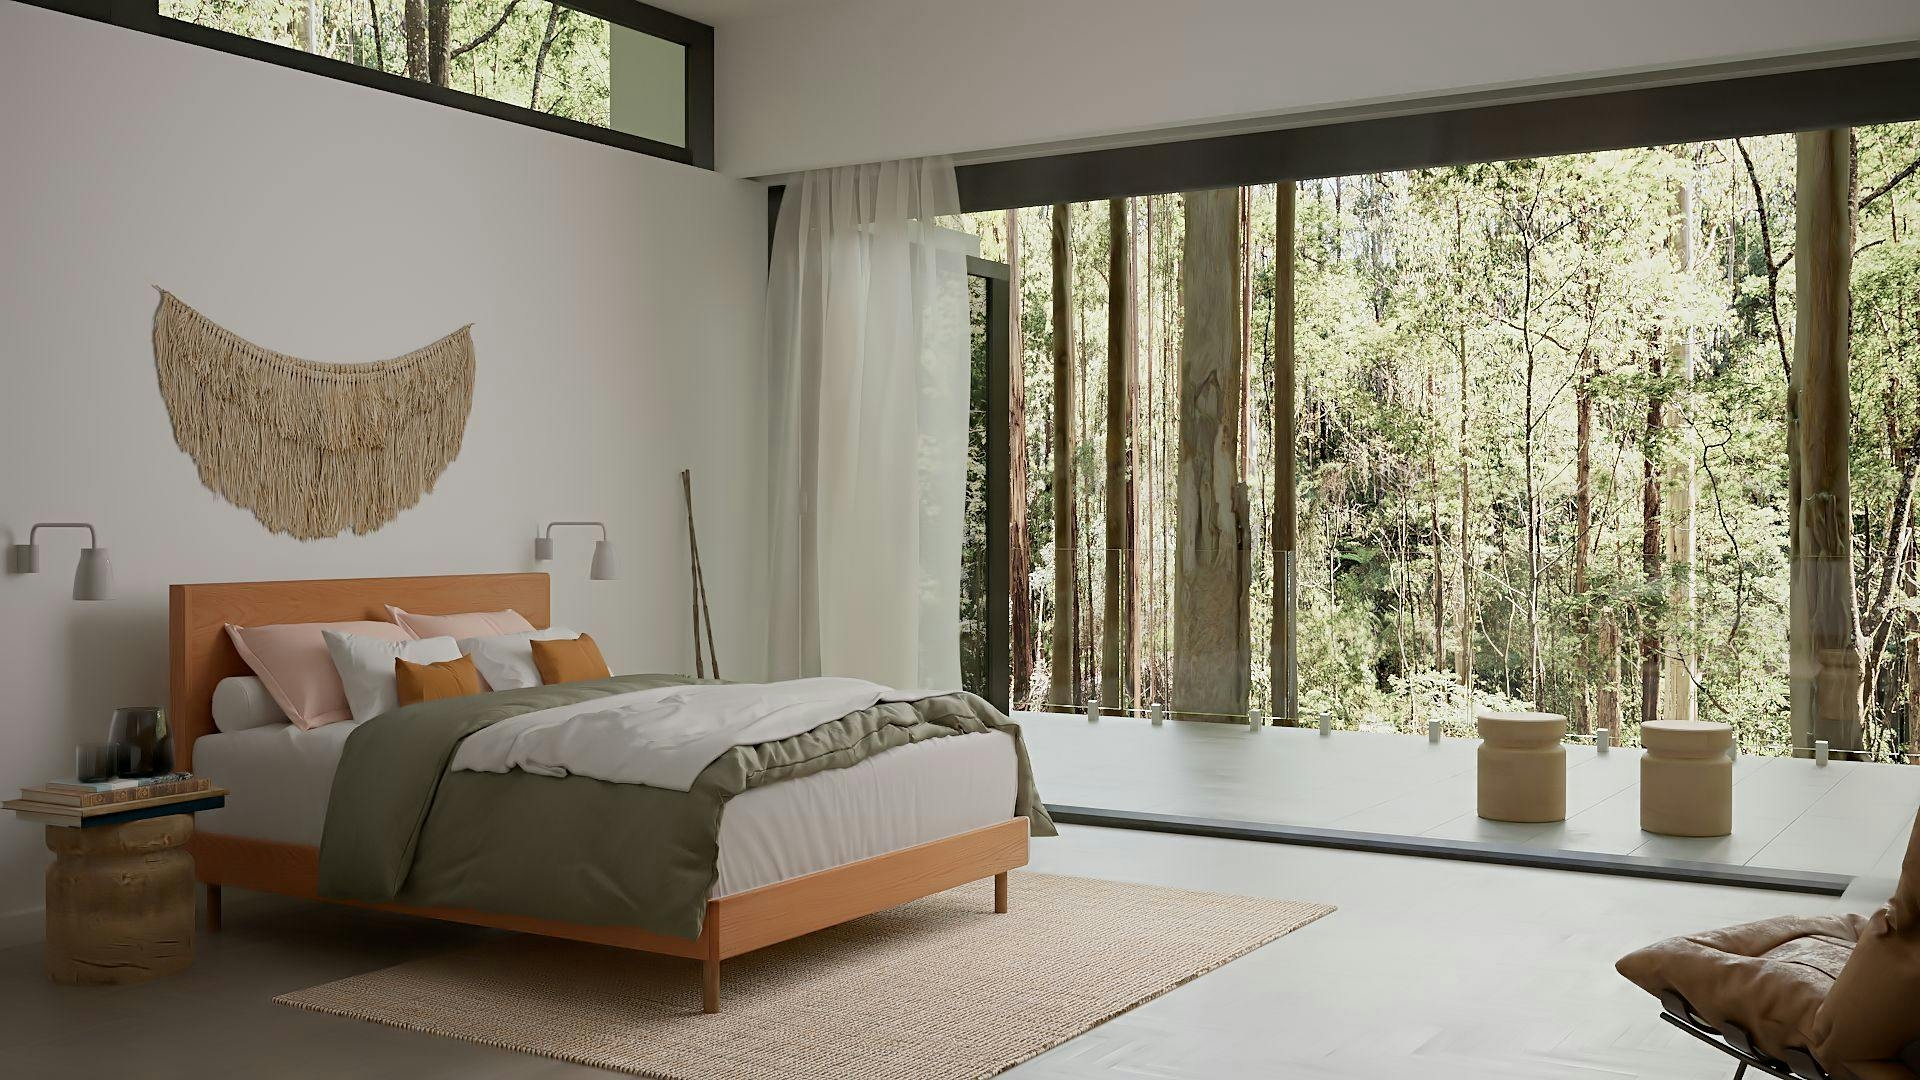 The Baker SD Indestruct Bed in European Oak, in a contemporary bedroom with organic accent decor, overlooking a lush Australian forest.